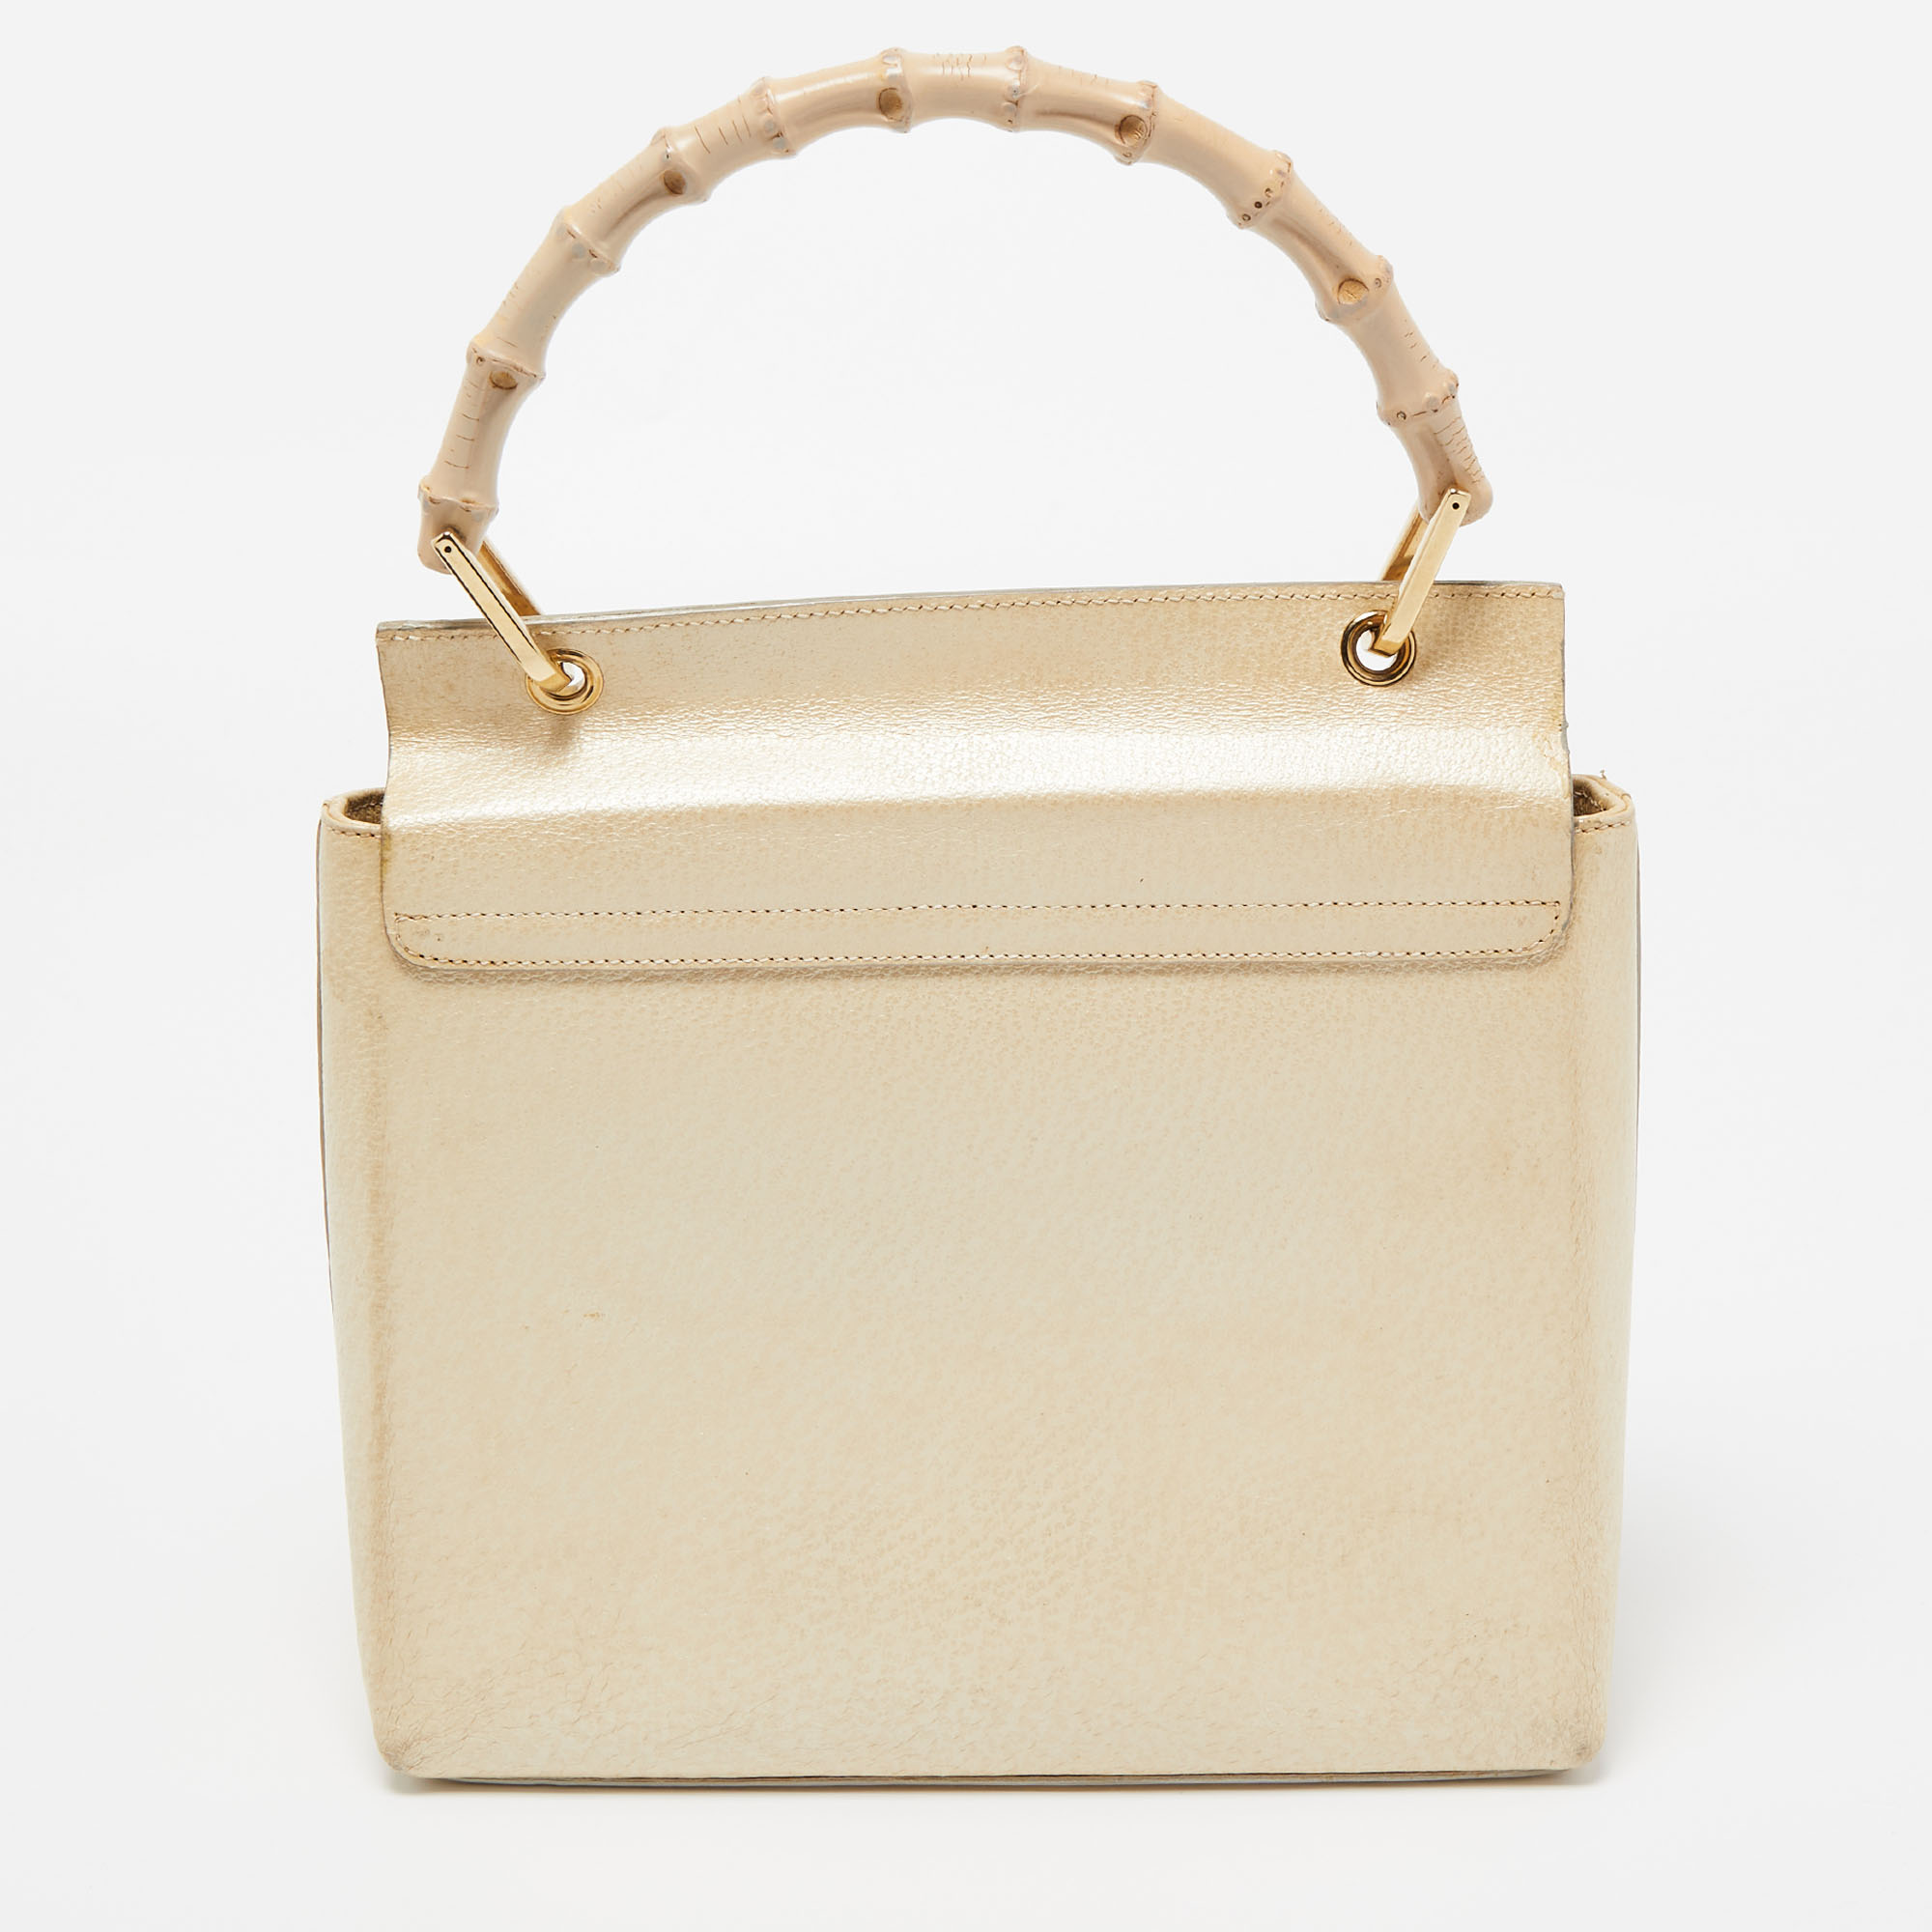 Gucci Beige Leather Bamboo Tap Handle Bag